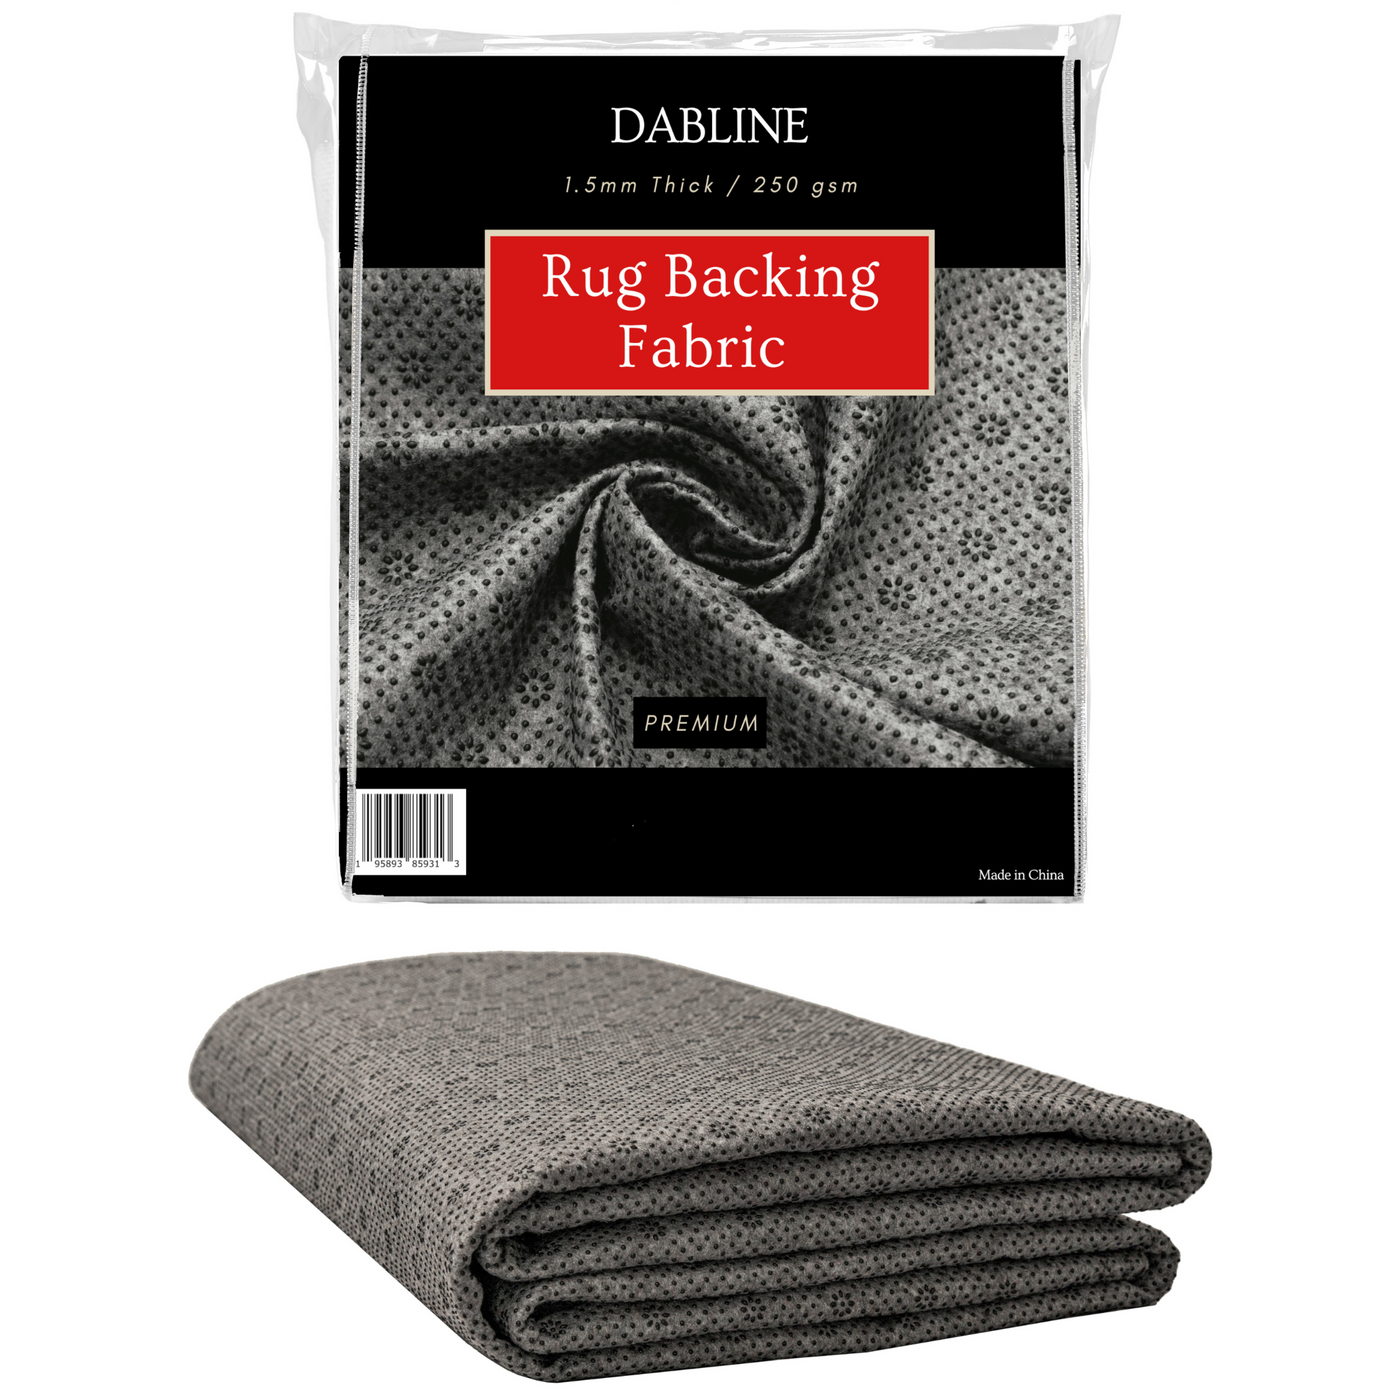 DABLINE 80 x 80 Primary Tufting Cloth for Rug Making and Punch